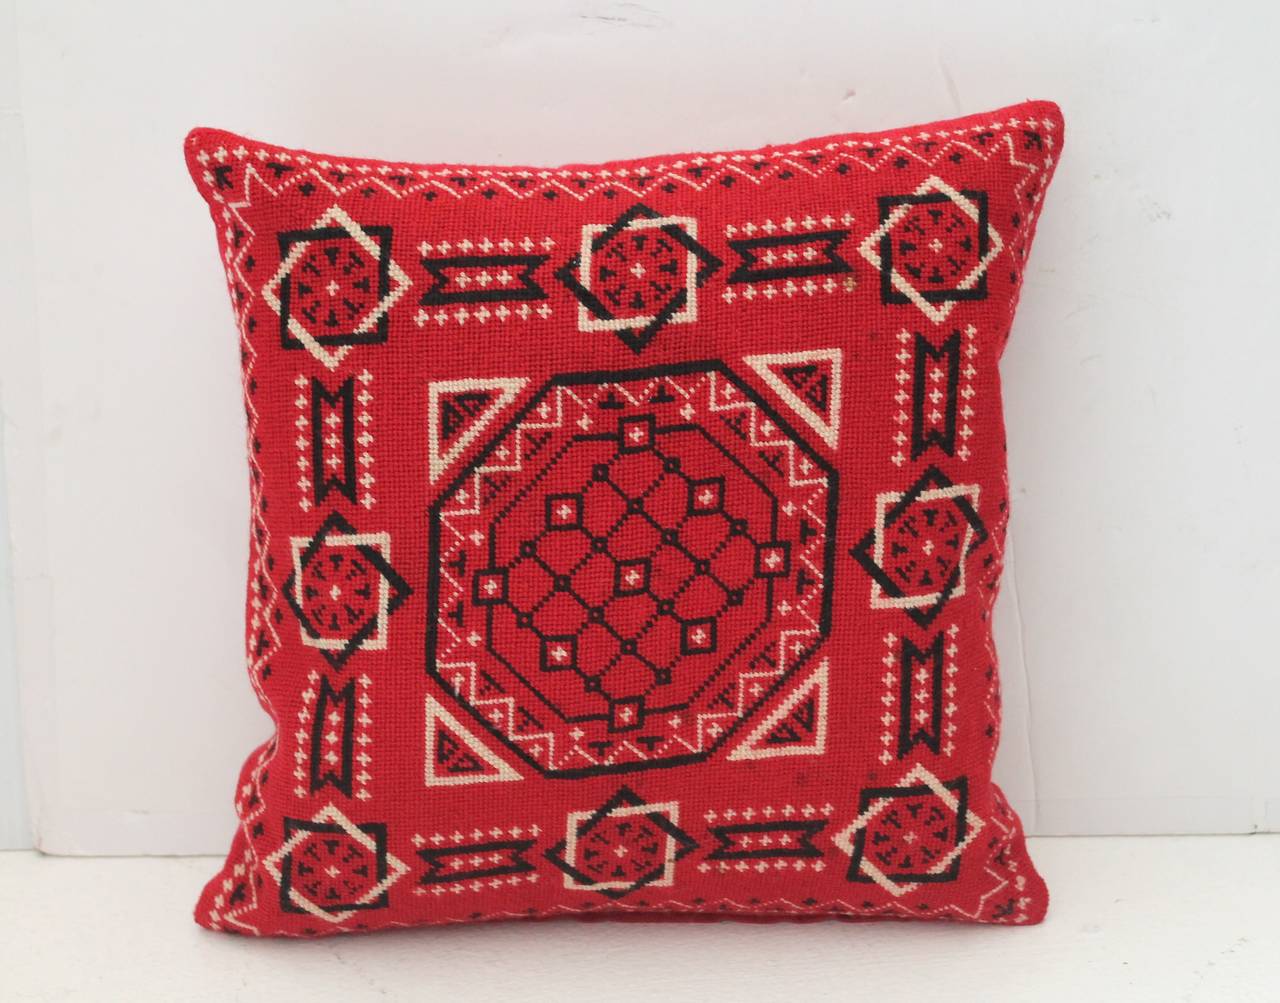 This amazing handwoven bandana is in great condition and has been made into a great one of a kind pillow. The backing is in a red cotton linen. The insert is down and feather fill.